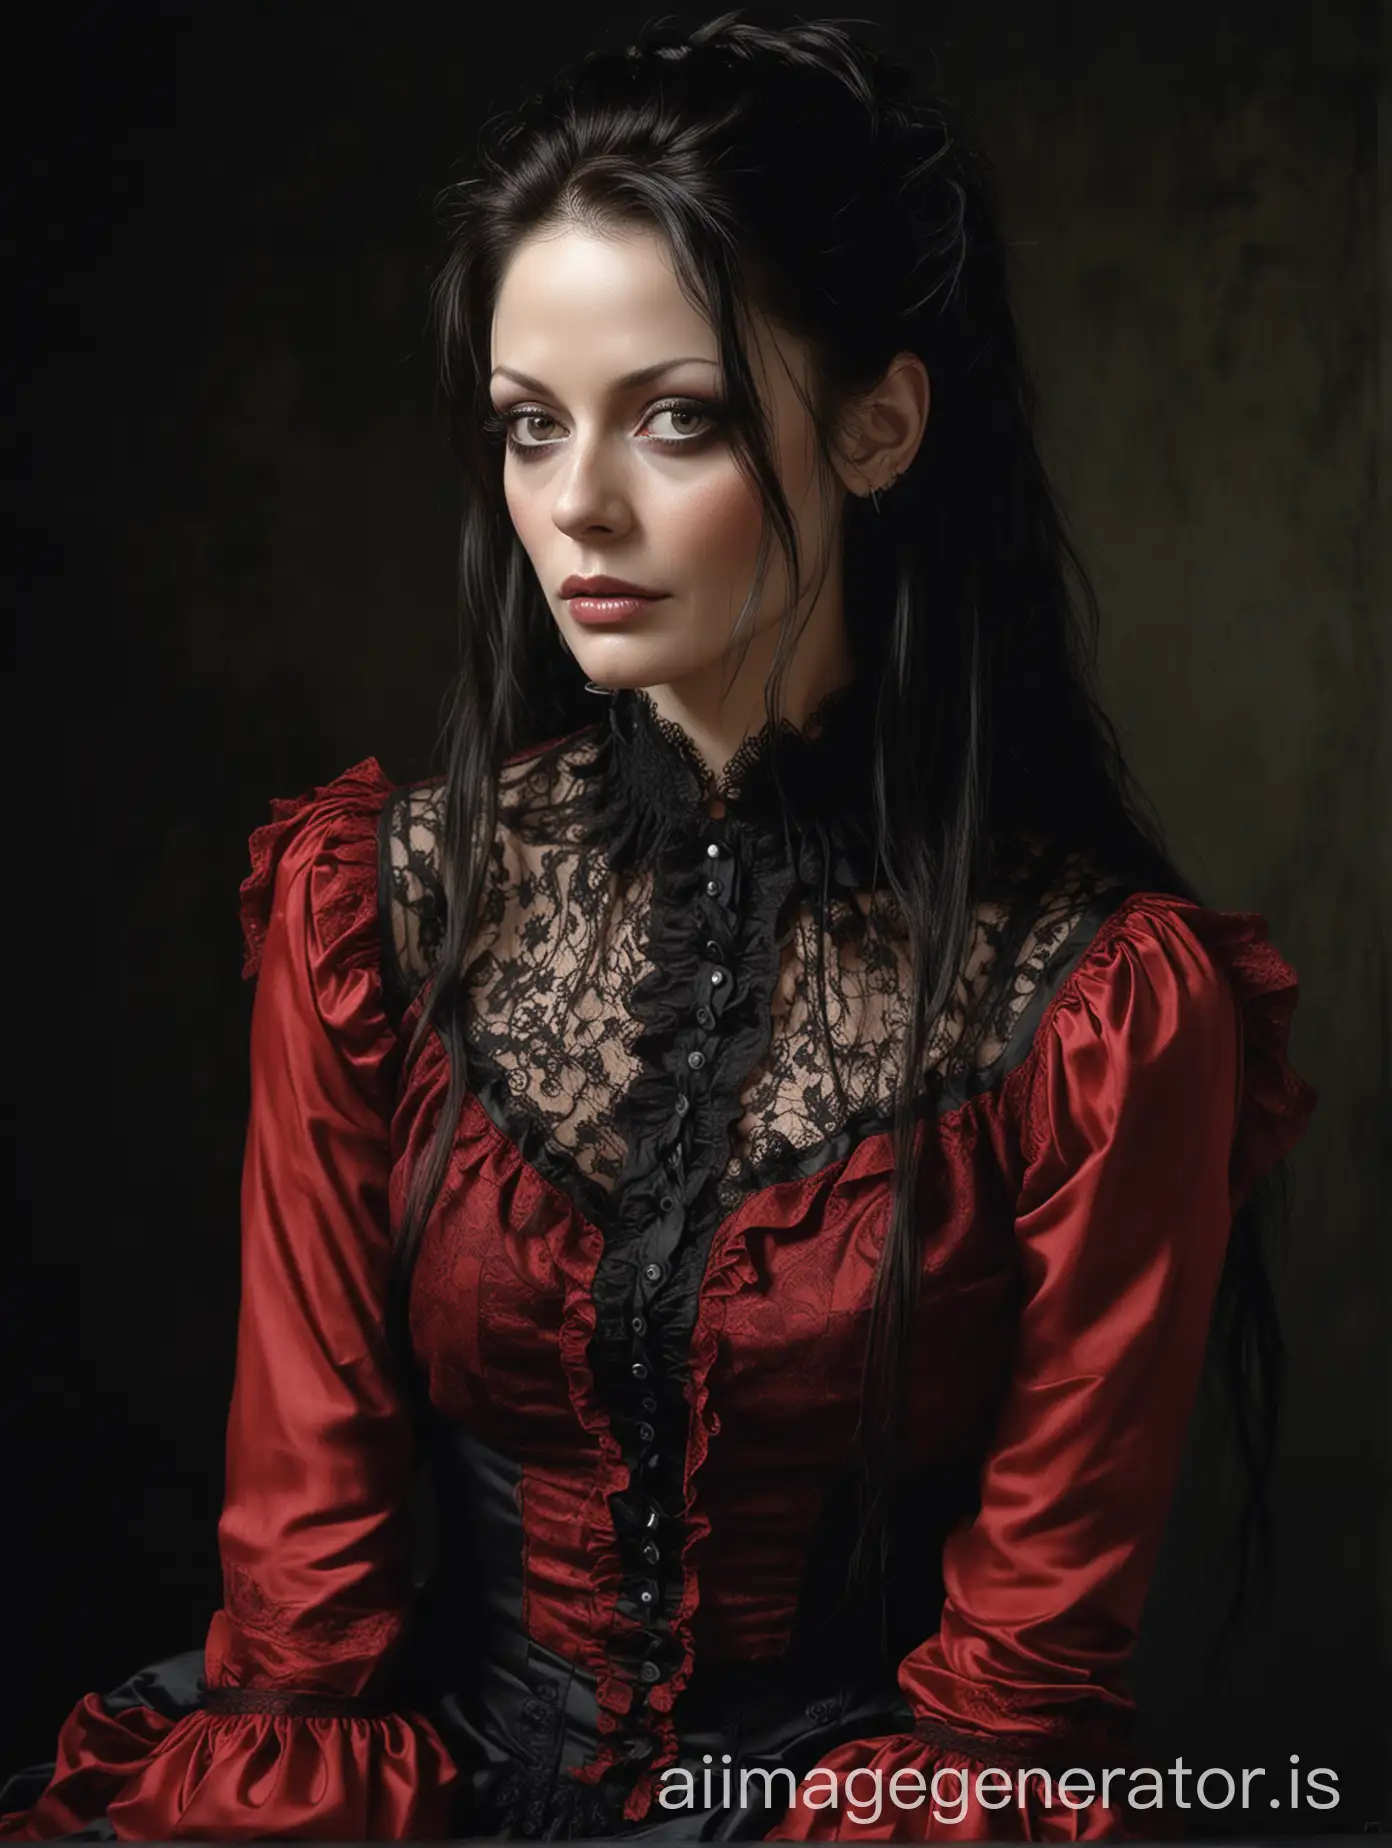 luis royo inspired dark art, Michelle Gomez face with white eyes, no makeup, serious face, wearing crimson long sleeve blouse with ruffles and lace with a black round collar, portrait, bright morning, bare neck, plain black backdrop, frontlight, sitting on a black satin block, long sleek straight hair